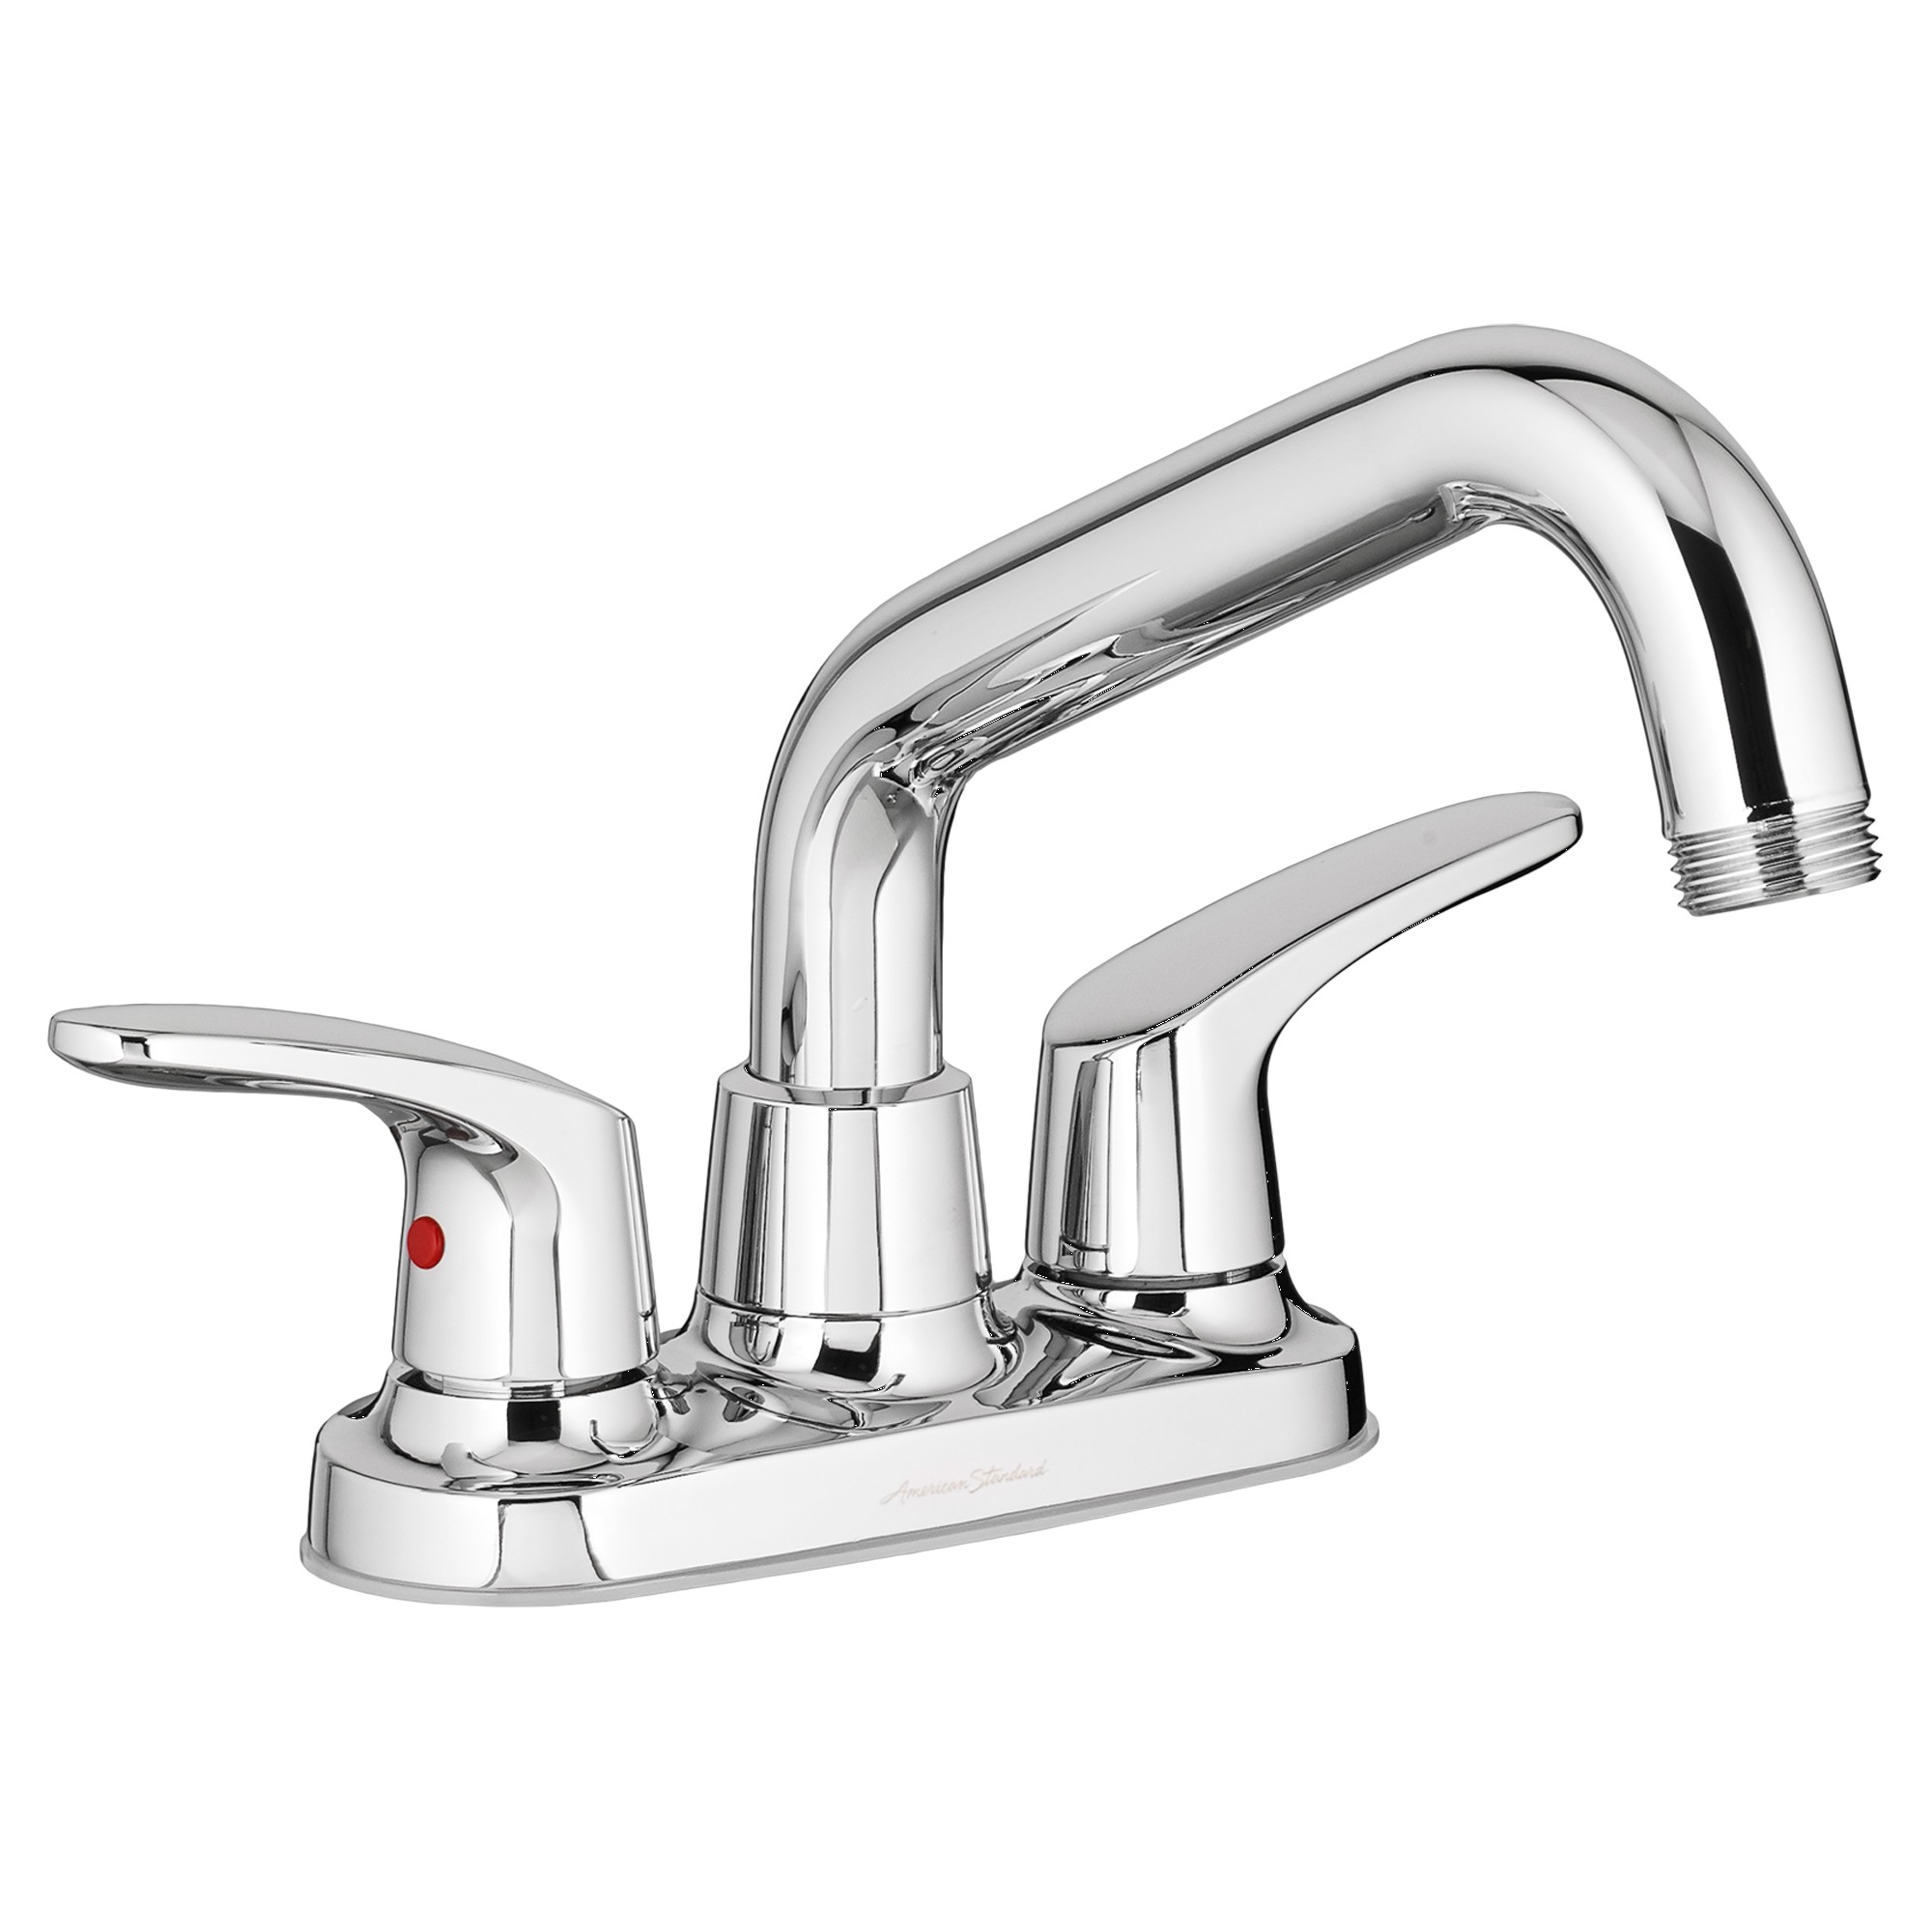 American Standard | 7074.240.002 | AMERICAN STANDARD 7074.240 2HANDLE LAUNDRY FAUCET CP 002 CHROME